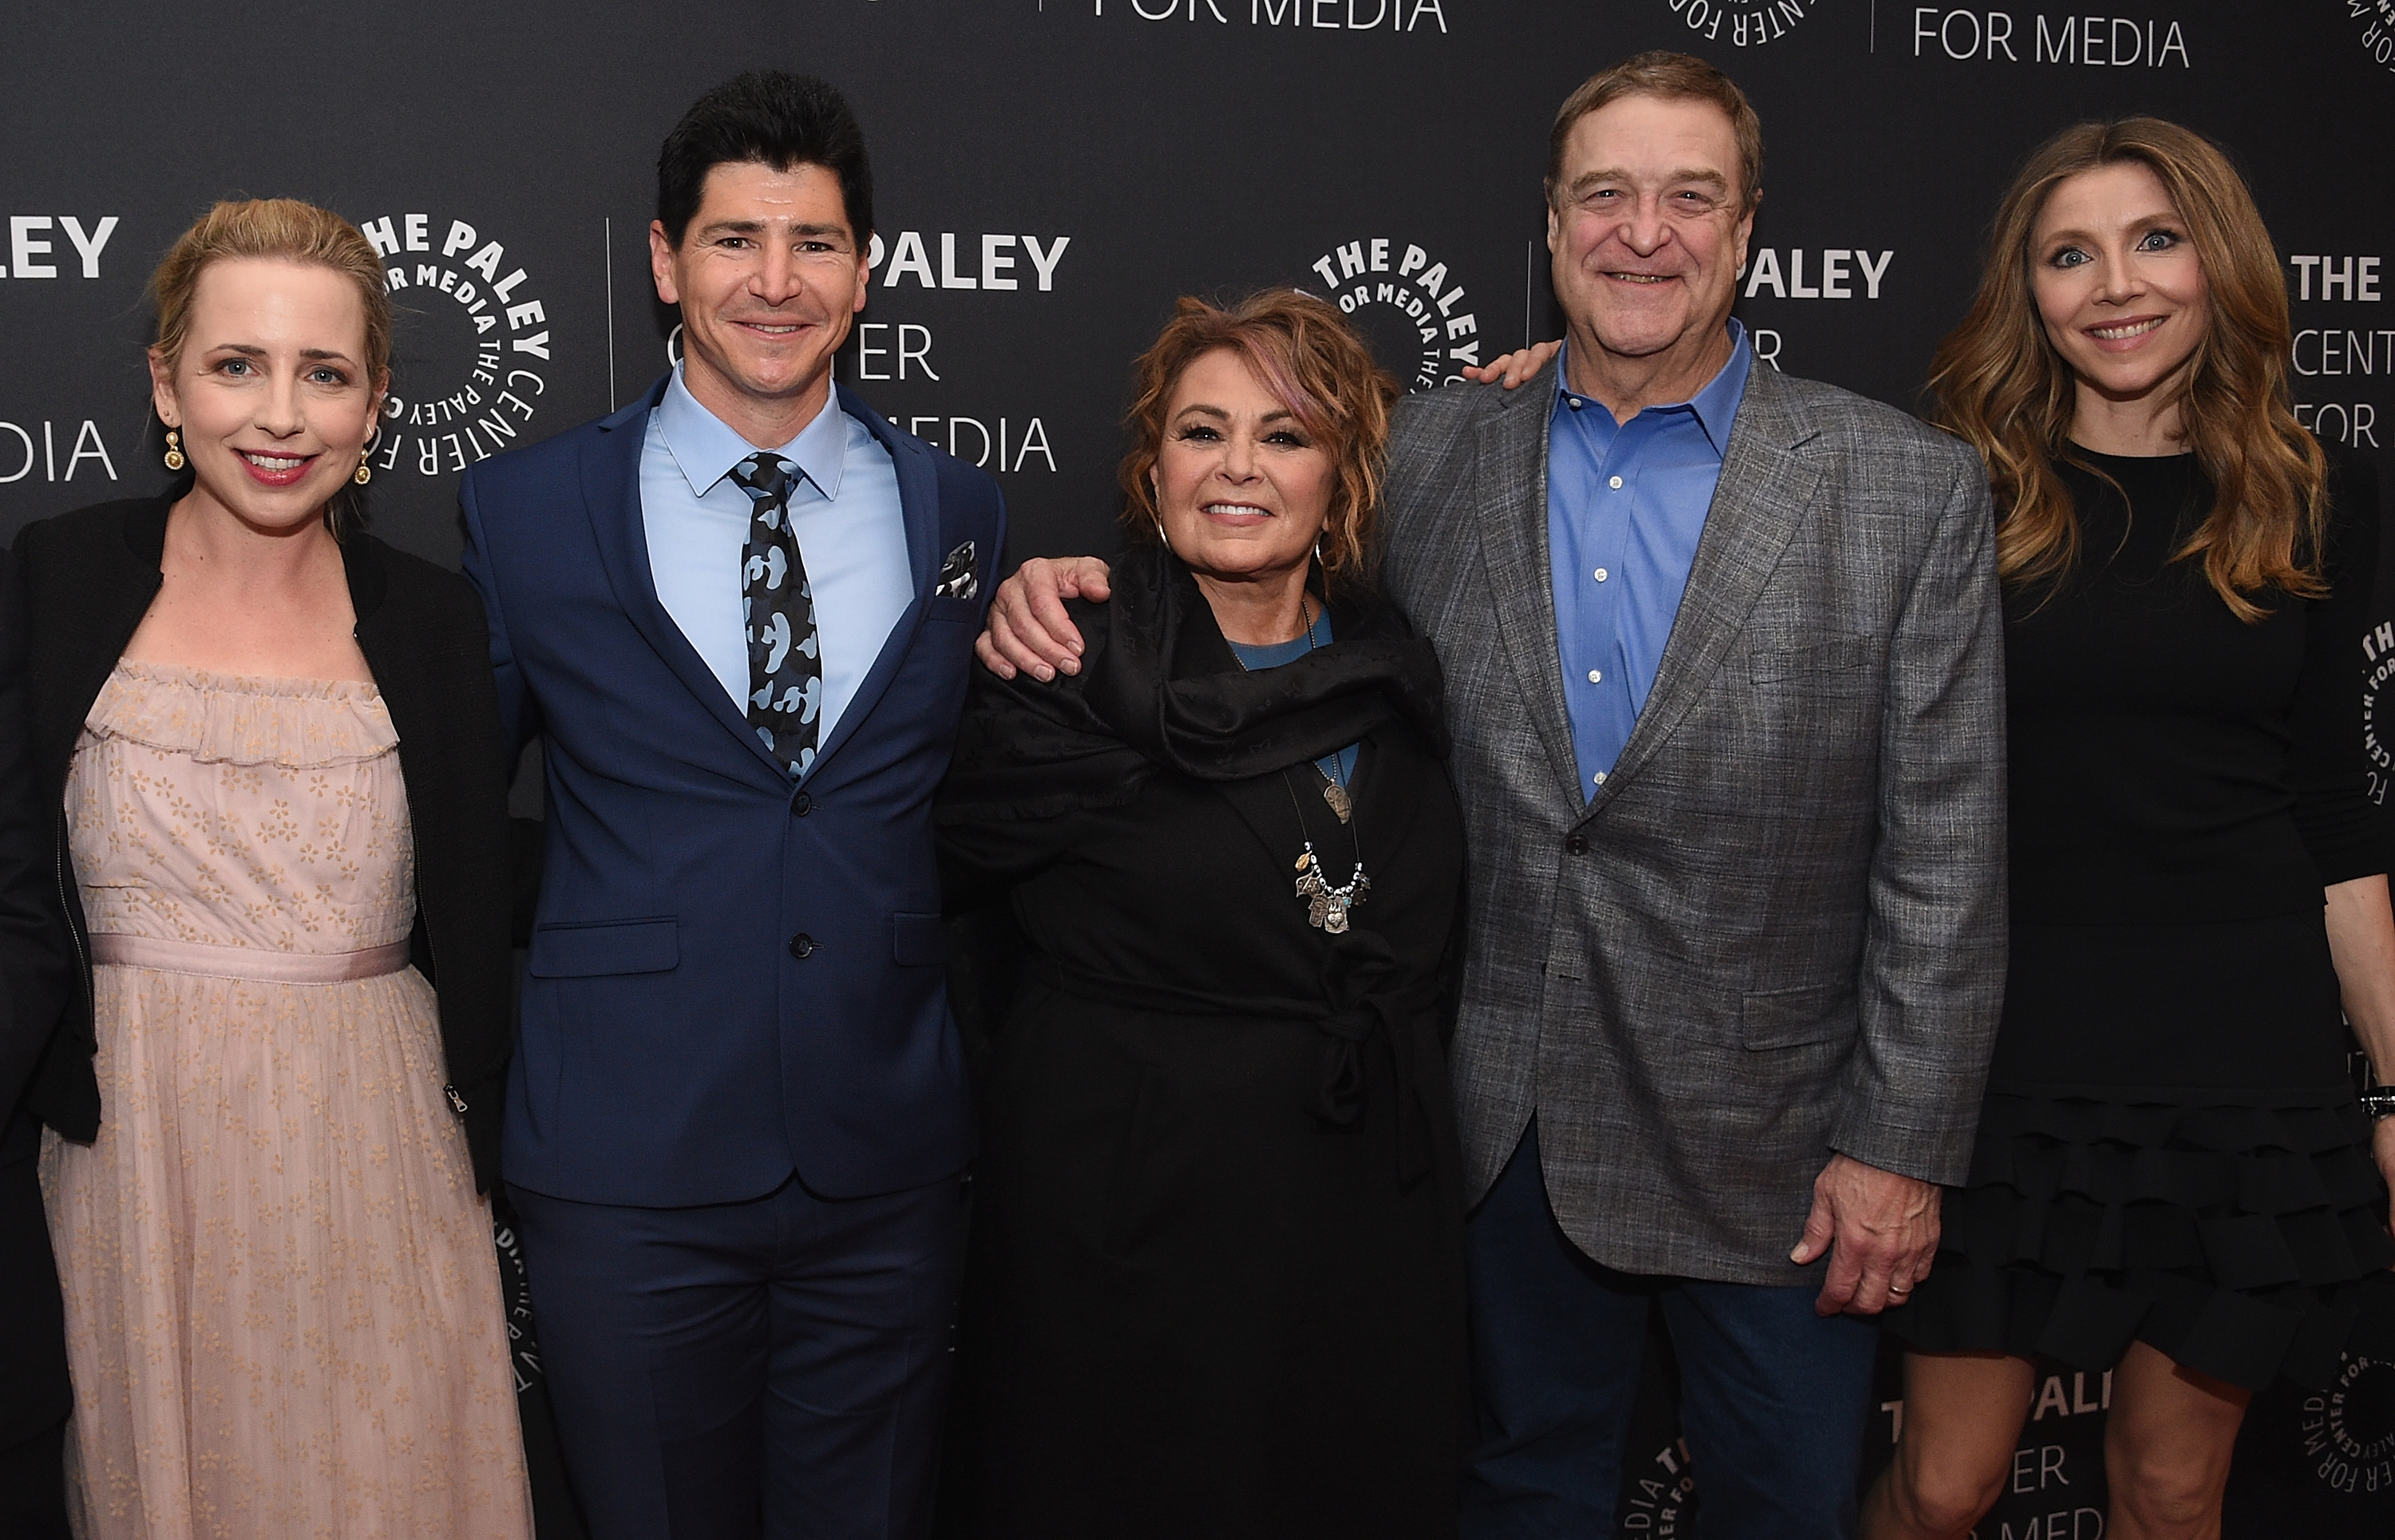 Lecy Goranson, Michael Fishman, Roseanne Barr, John Goodman and Sarah Chalke at An Evening With The Cast Of "Roseanne"on March 26, 2018, in New York City | Source: Getty Images